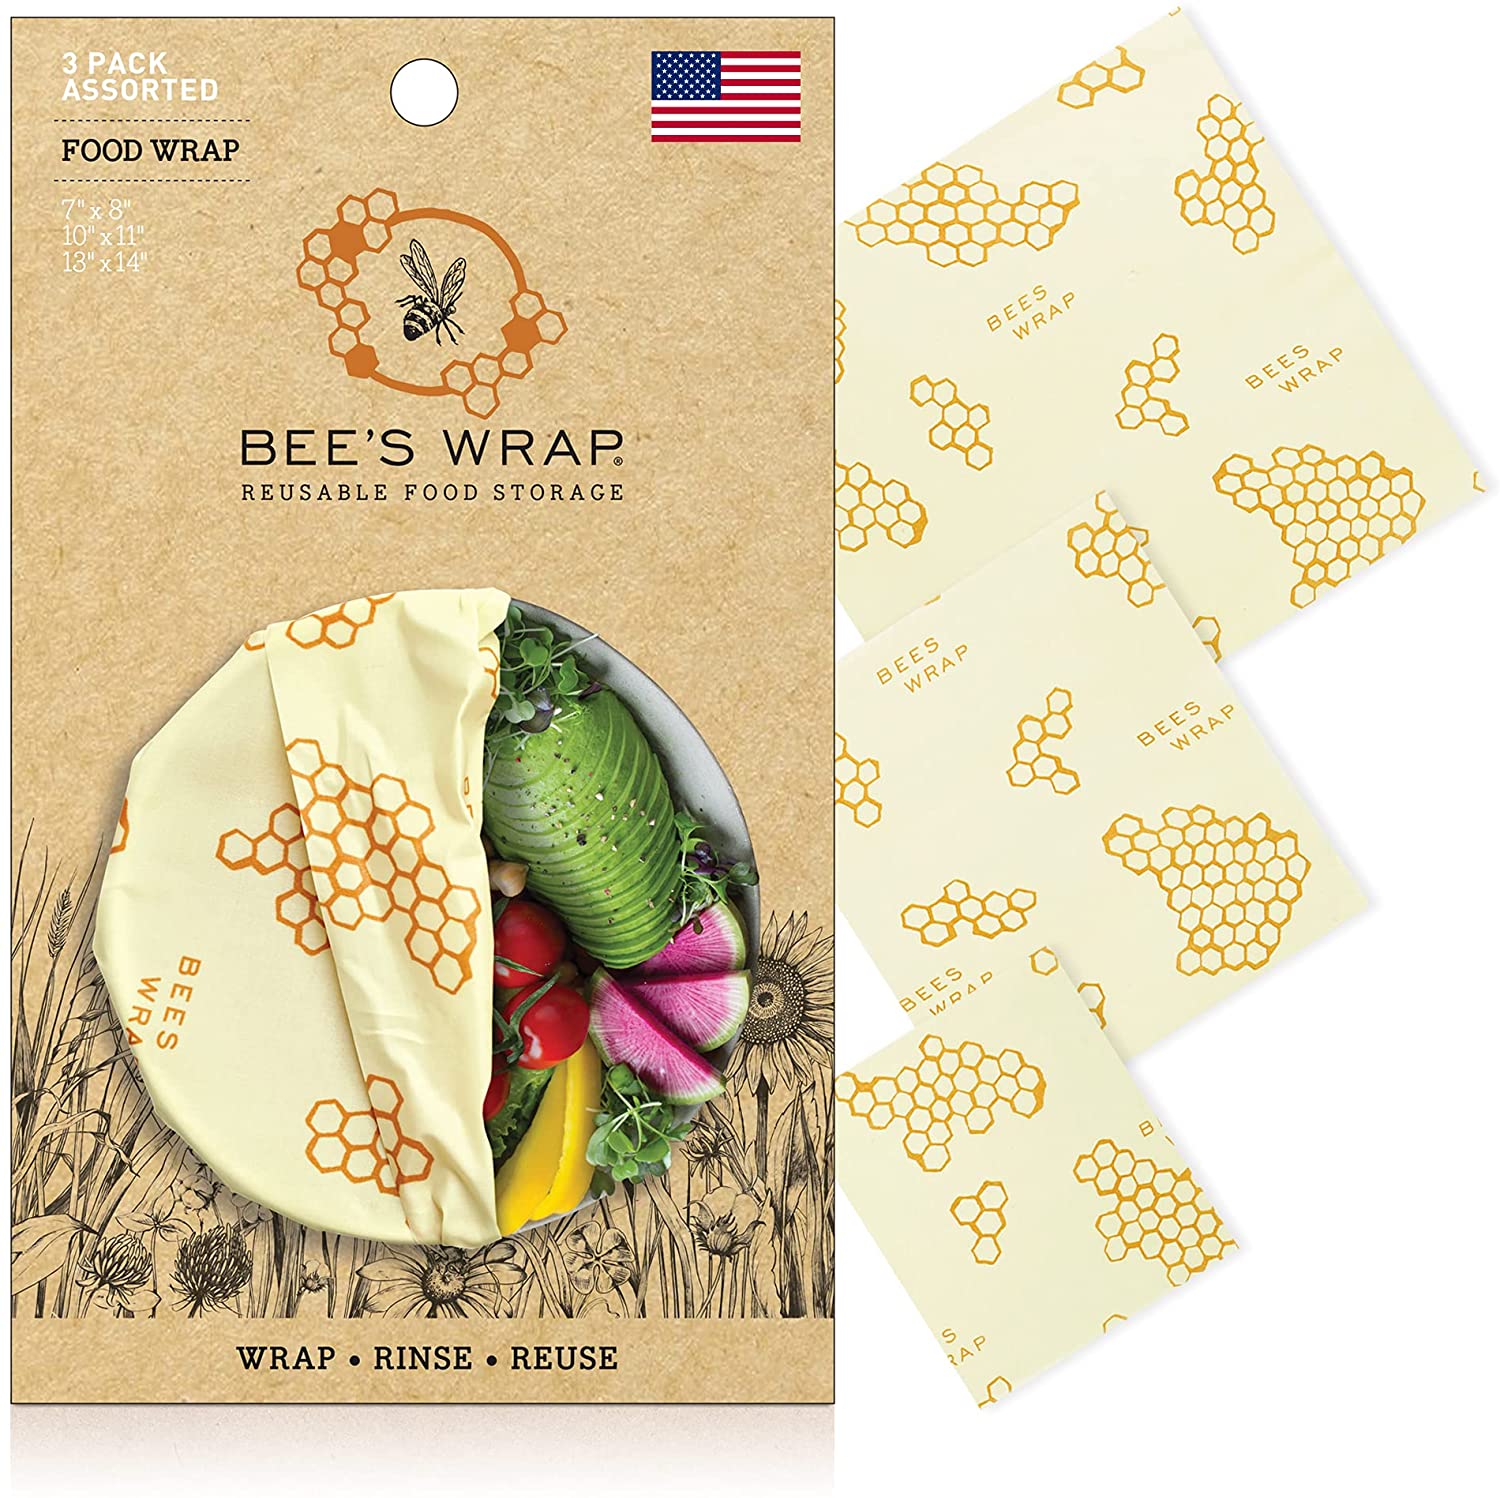 Bee's Wrap - Reusable Beeswax Food Wraps in 3 Sizes (S,M,L) | Stocking Stuffer For Foodies | Amazon Stocking Stuffers | Stocking stuffers For Adults | stocking stuffers for men | mens stocking stuffers | Stocking stuffers for her | Stocking stuffers for guys | Cheap stocking stuffers | Best stocking stuffers | Stocking stuffers for wife | stocking stuffer gifts | Best stocking stuffers